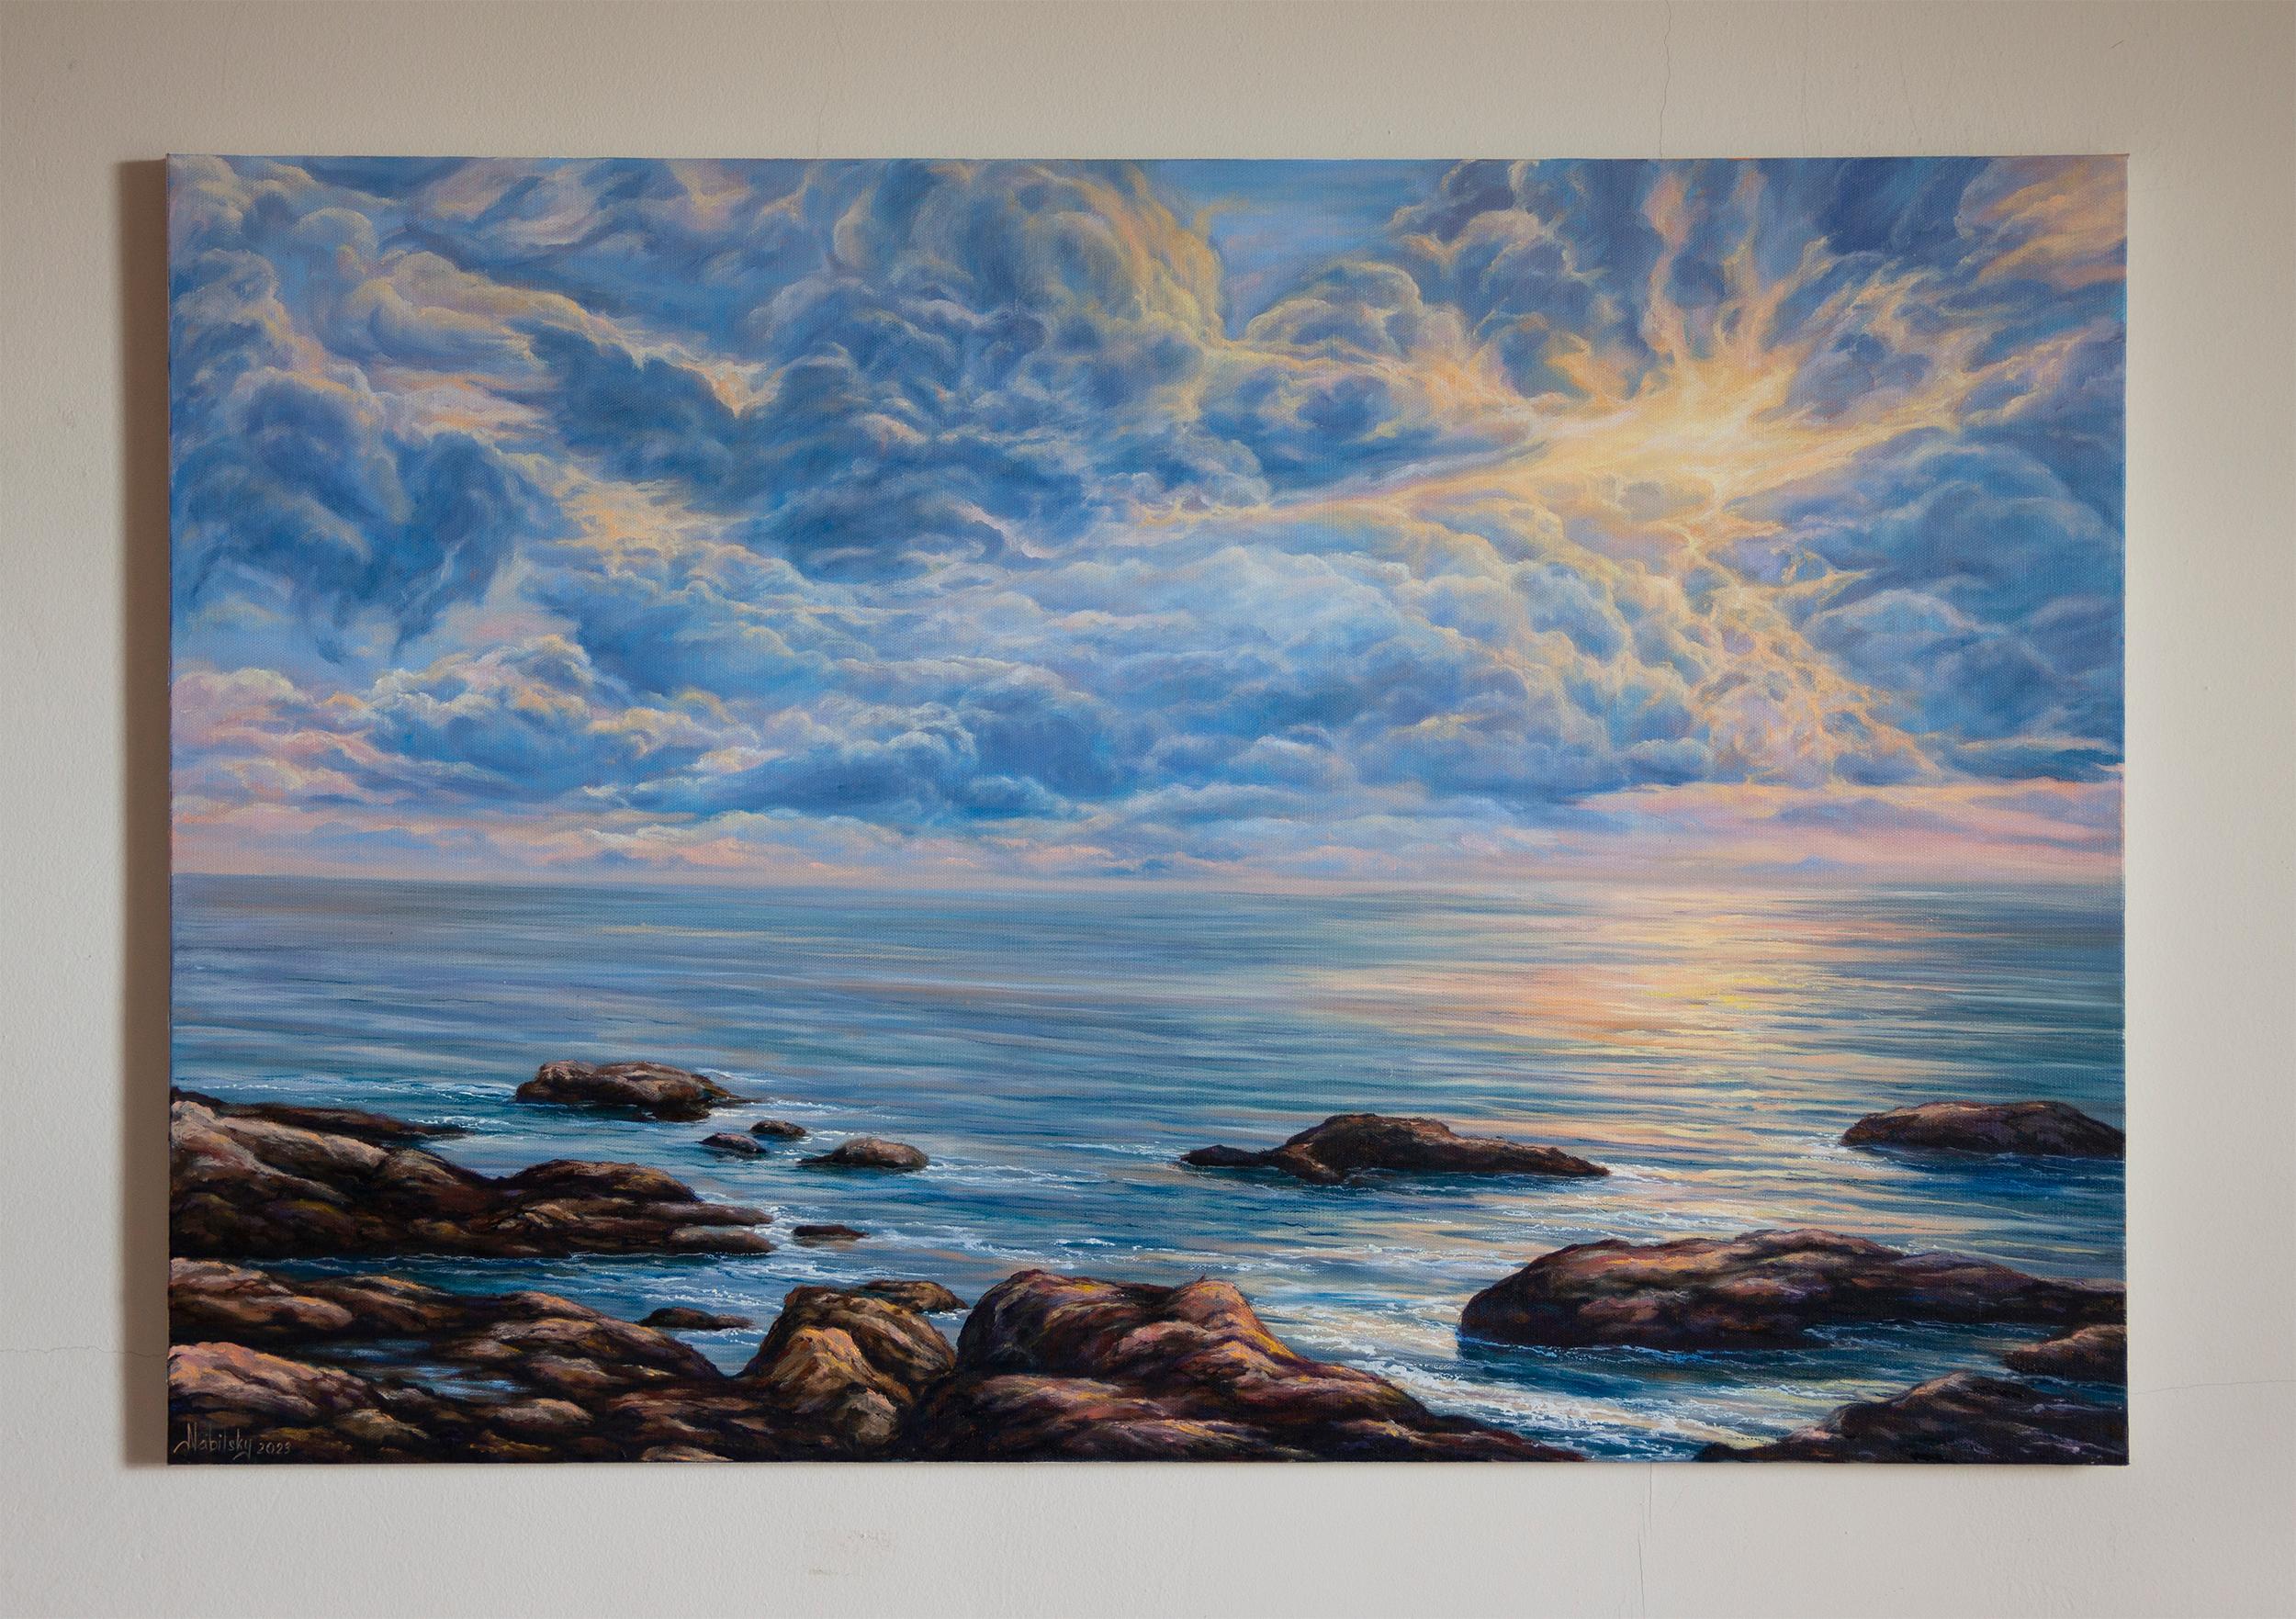 <p>Artist Comments<br>Inspired by the ocean and the captivating moments of sunrises, artist Olena Nabilsky captures the radiant glow of the clouds. Enveloping everything in its luminosity, the serene ocean mirrors the gentle hues of the sun while